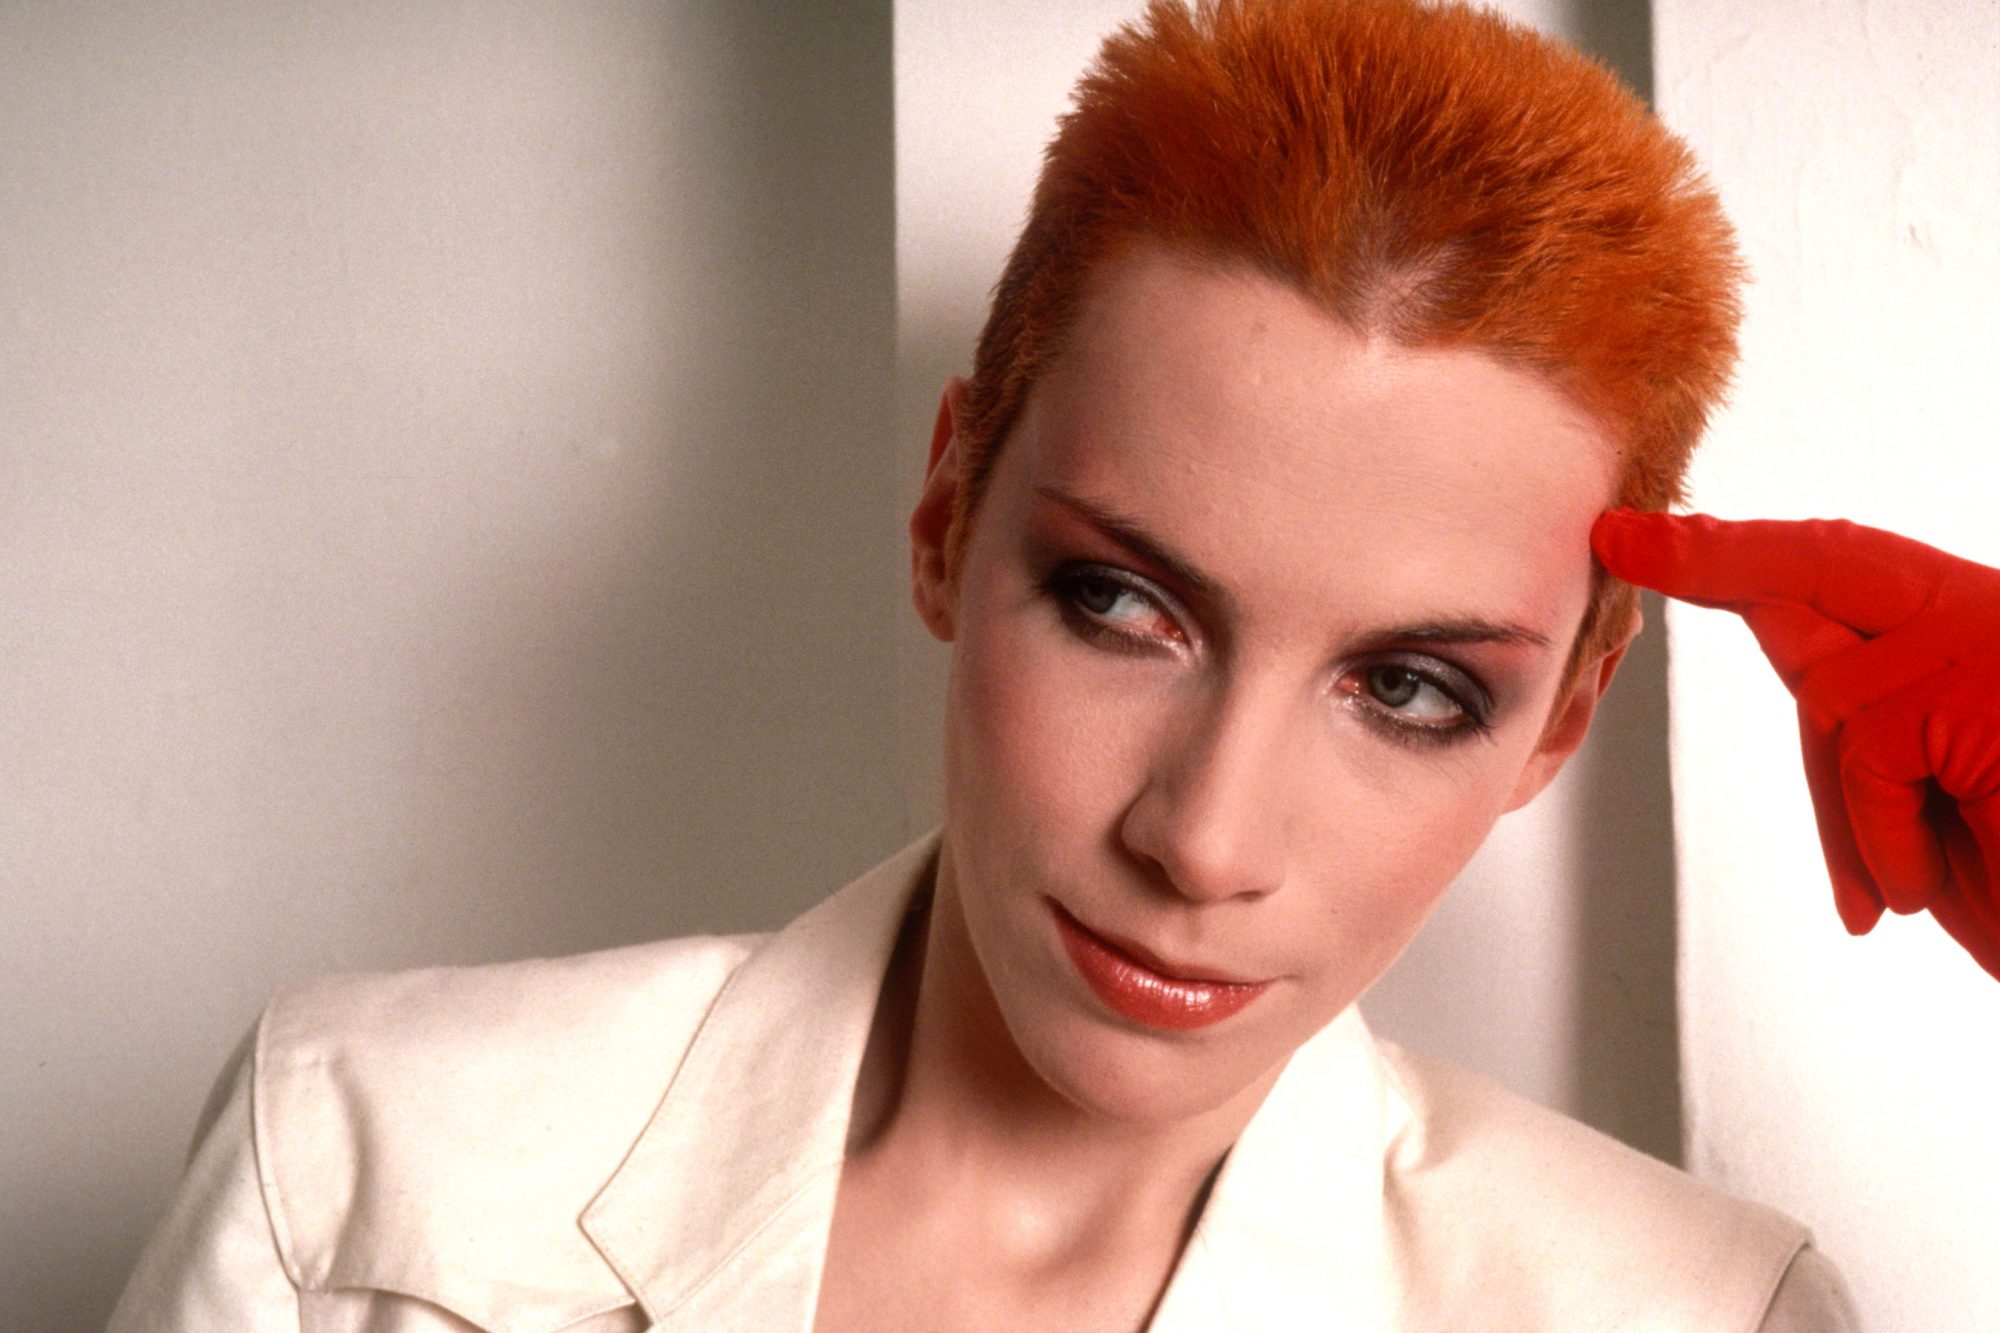 Annie Lennox with her signature orange hair, the singer of the hit song Sweet Dreams